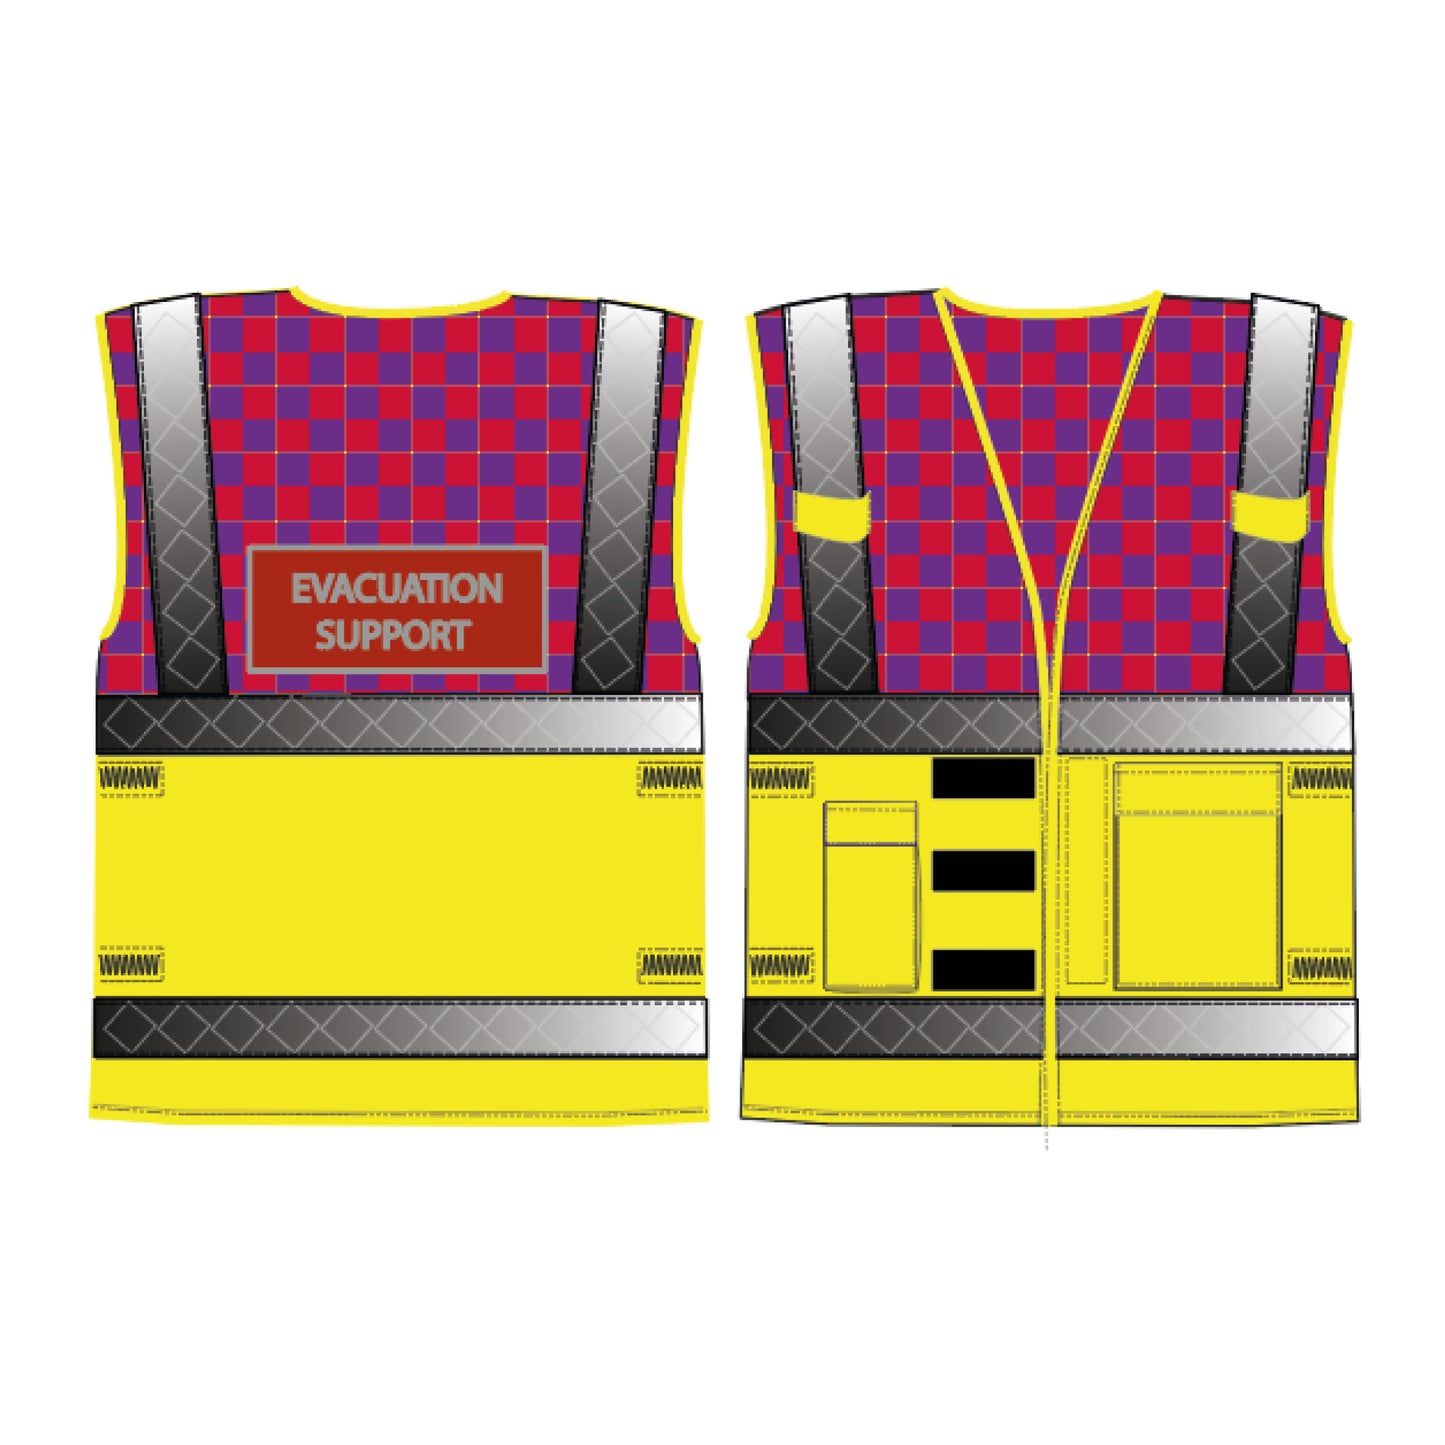 IONIC Evacuation Support Tabard – Ionic Rescue